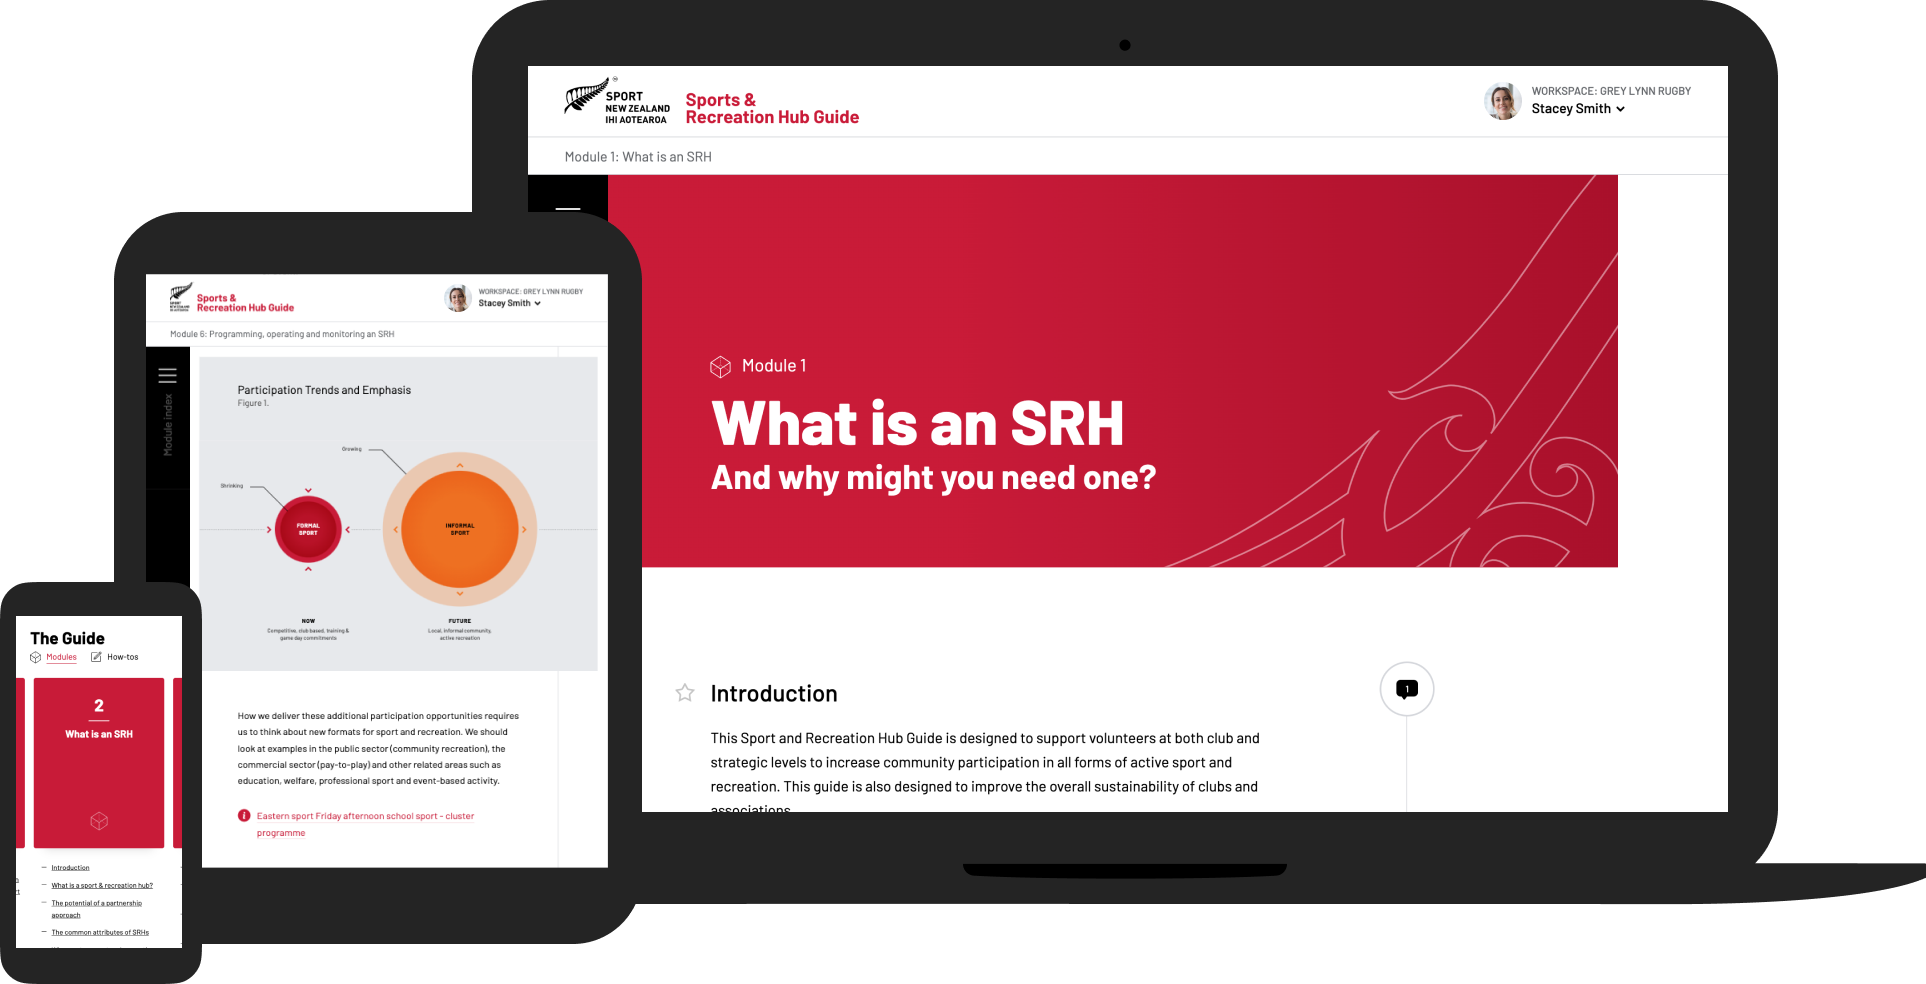 The responsive layout of The Sport & Recreation Hub Guide across various devices